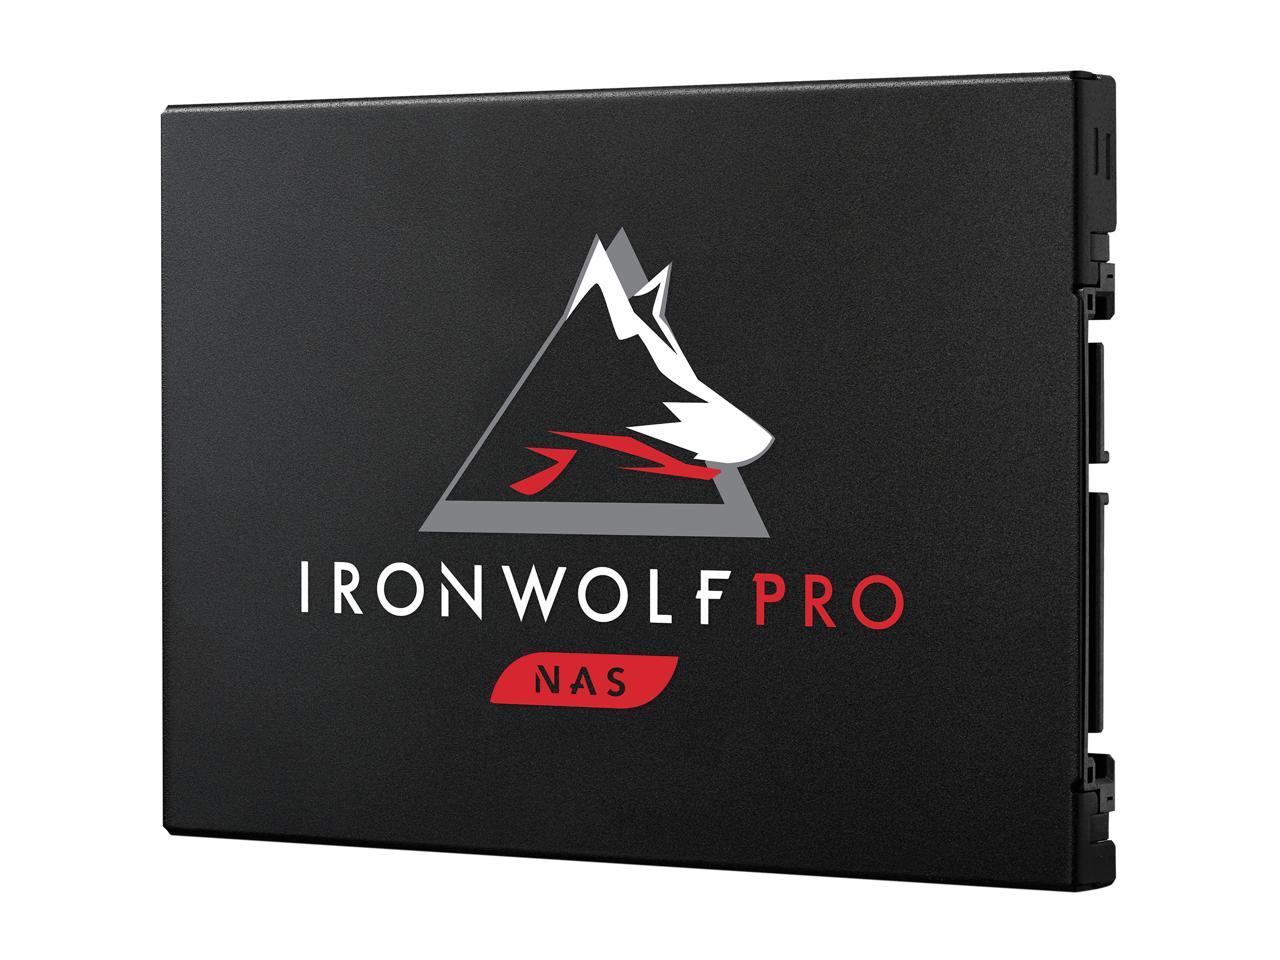 Seagate IronWolf Pro 125 SSD 960GB NAS Internal Solid State Drive - 2.5 Inch SATA 6Gb/s Speeds up to 545 MB/s, 1 DWPD Endurance and 24x7 Performance for Creative Pro, and SMB (ZA960NX1A001)